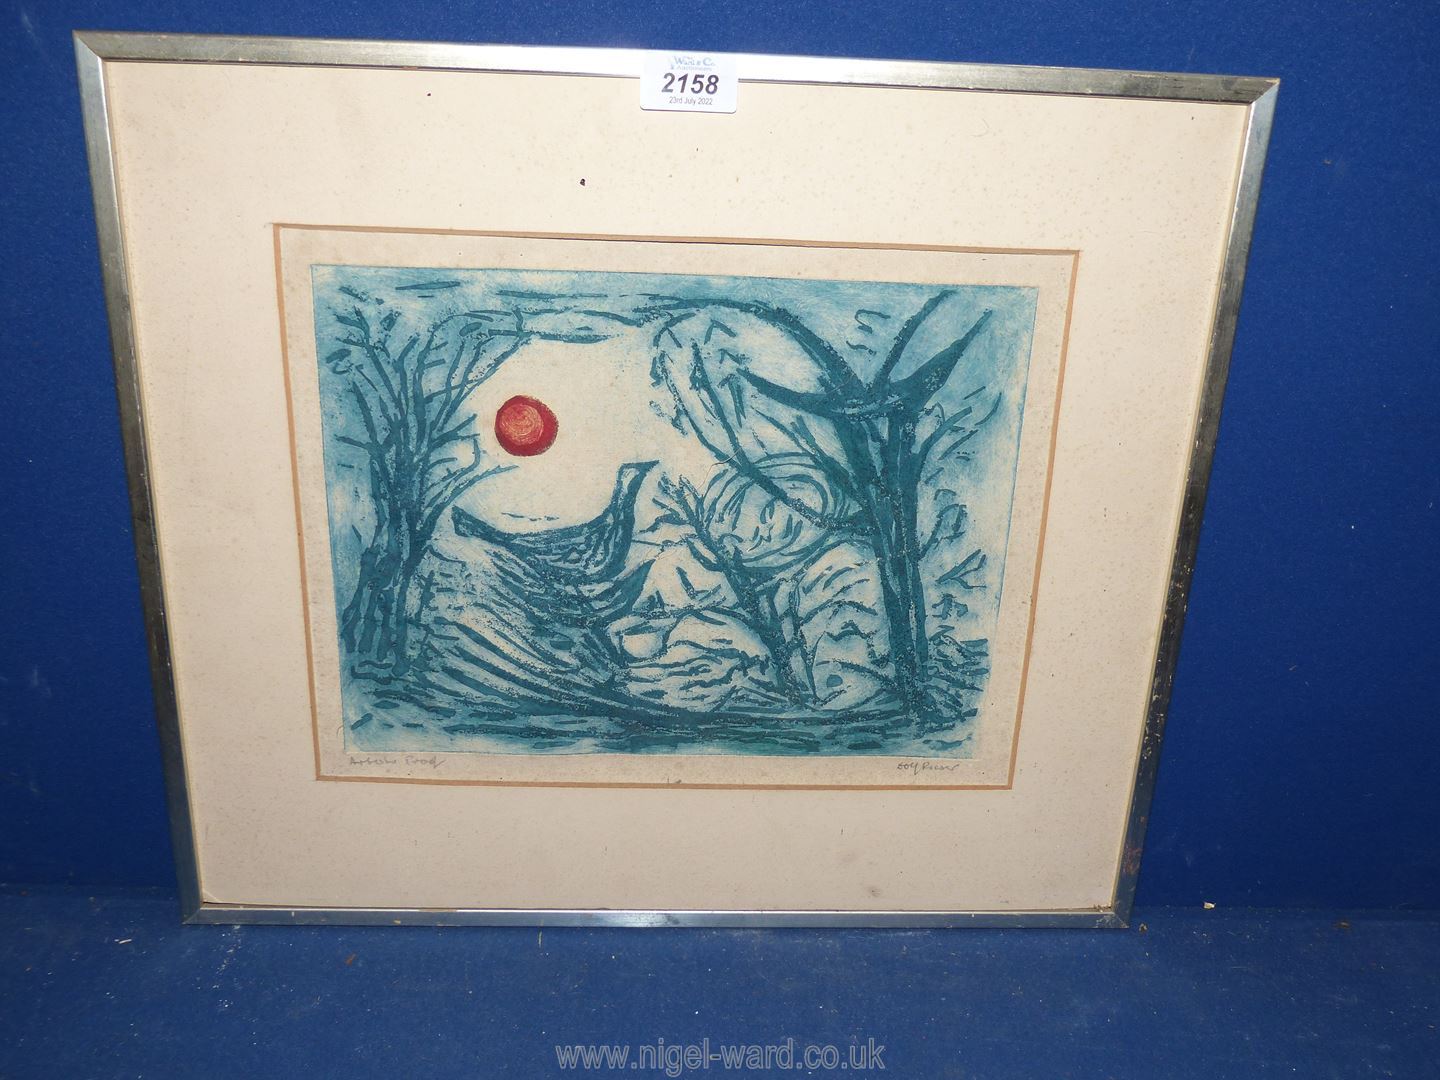 A framed but unglazed Artist's Proof of a bird sat in undergrowth with red sun setting in the